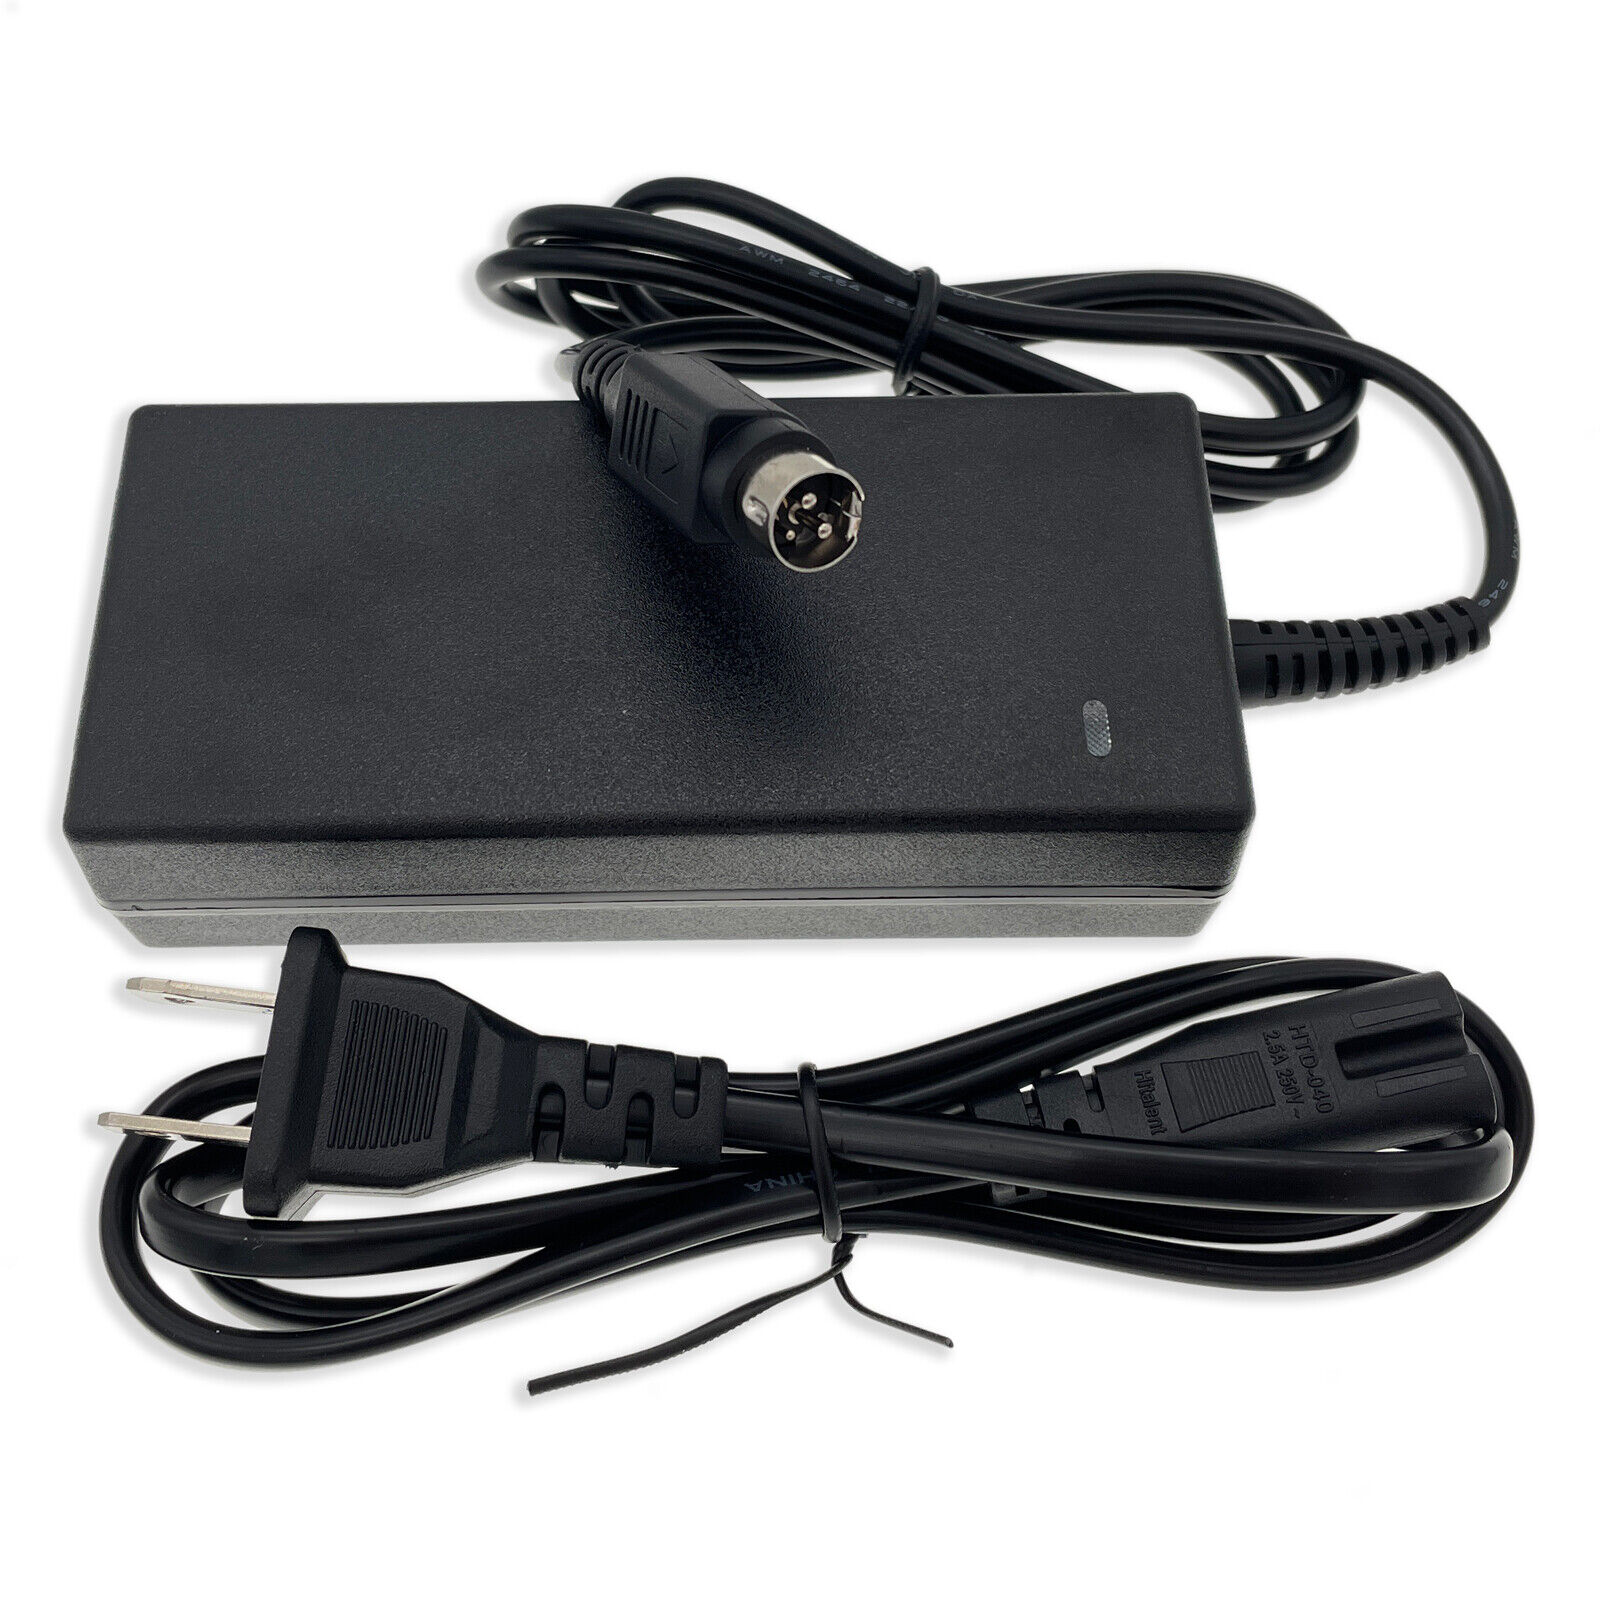 AC Adapter Charger For Epson TM-U220B TM-U220D Receipt Printer DC Power Supply AC Adapter Charger For Epson TM-U220B TM